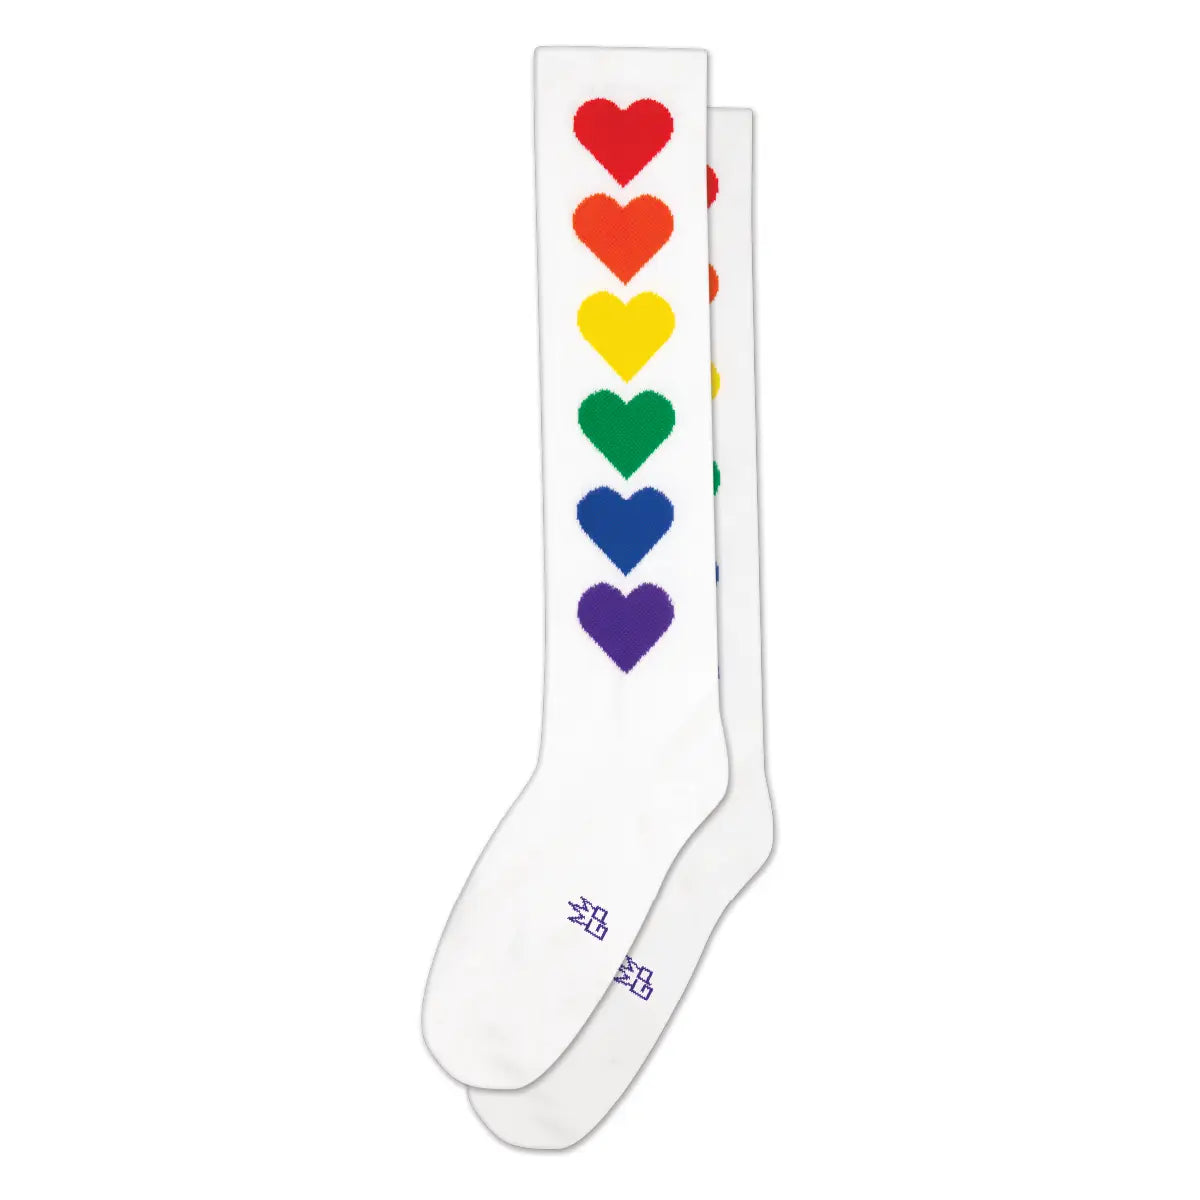 White ribbed knee socks with a single row of large solid color hearts. The hearts are in a rainbow in the order of red, orange, yellow, green, blue, and purple.